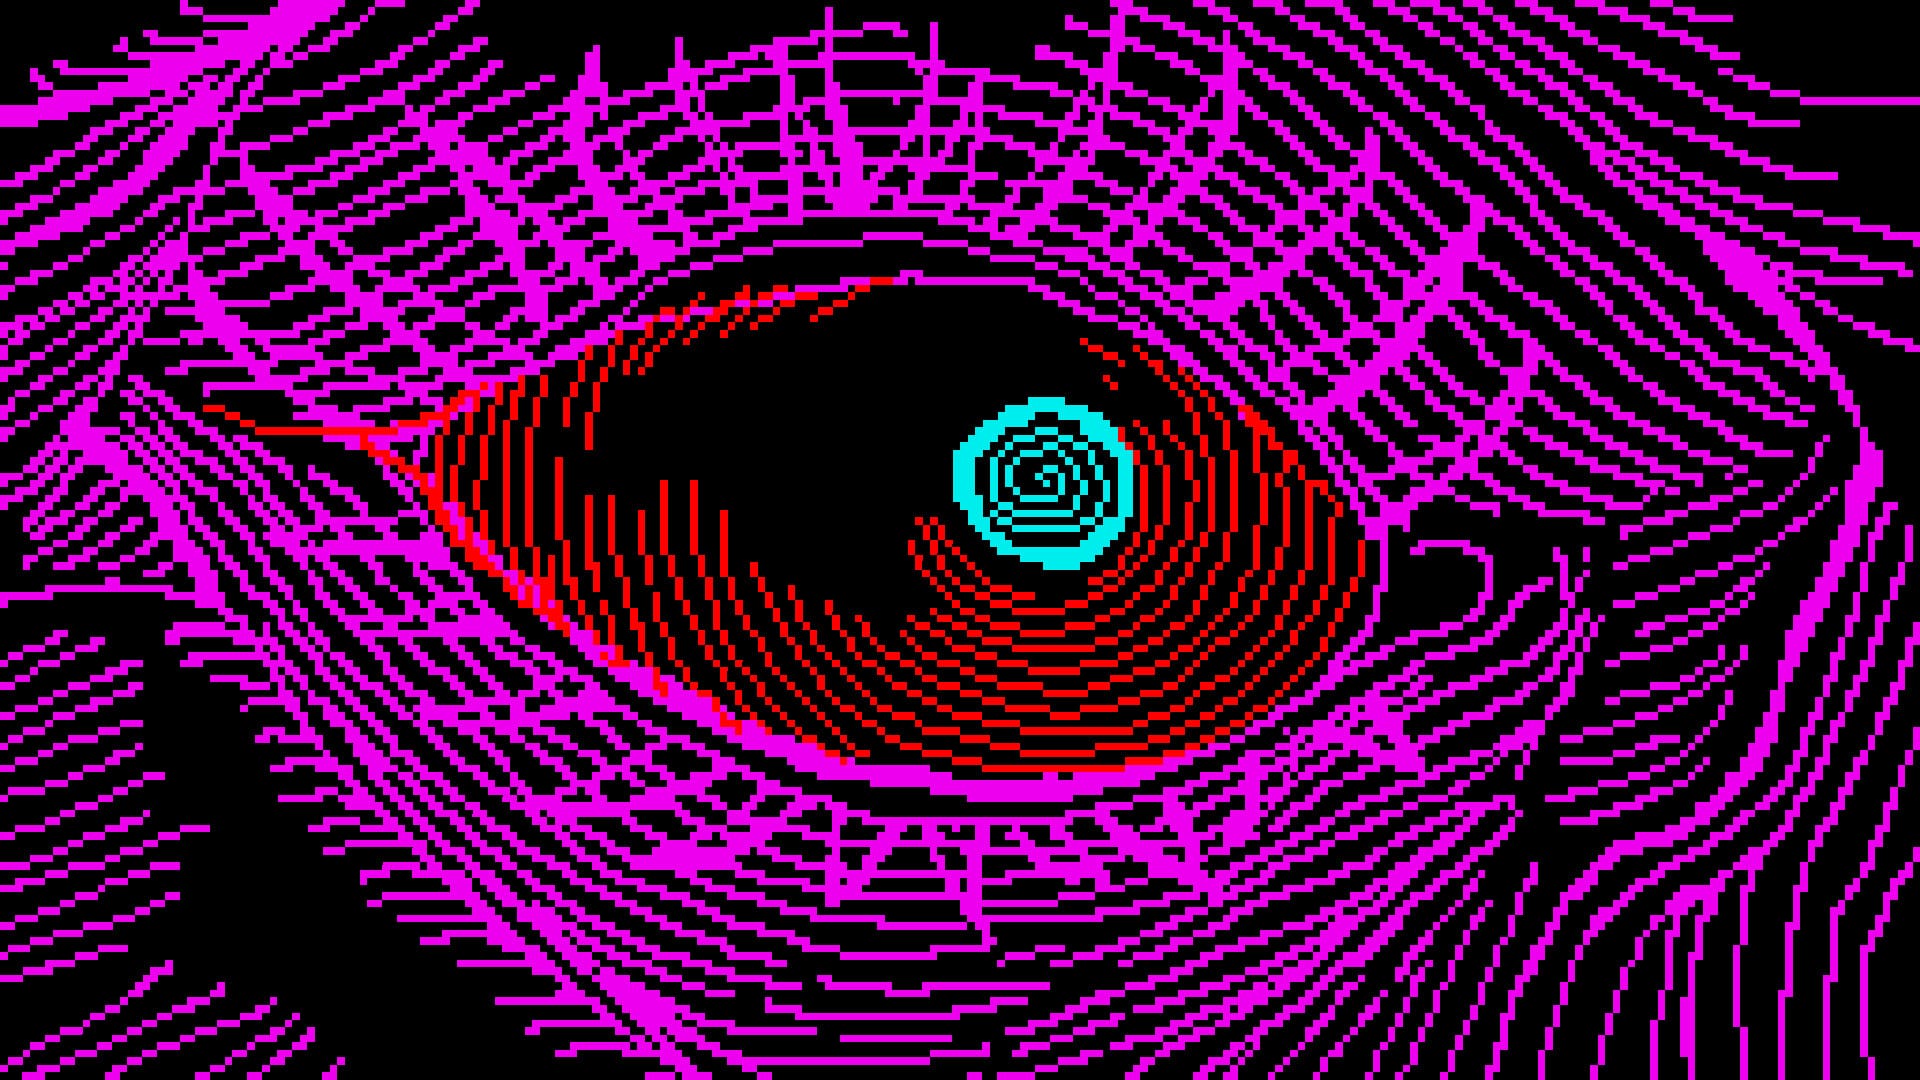 A screenshot from An Eye for Optical Theory 1666. It's a closeup of an eye that's red with a blue pupil. The face is pink.